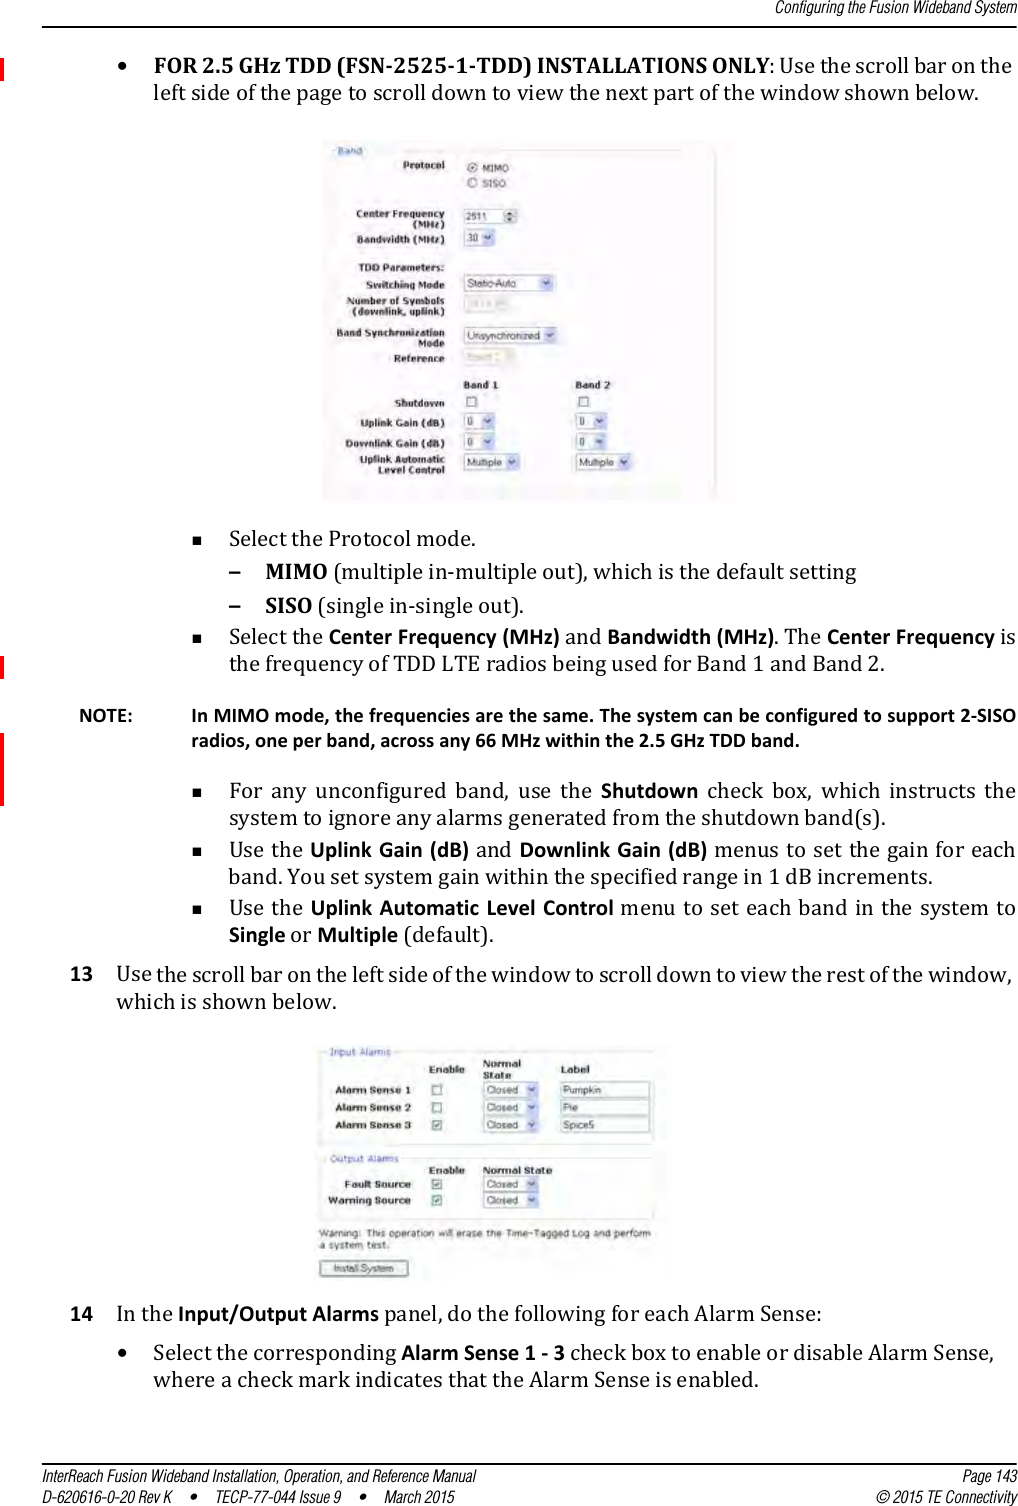 Configuring the Fusion Wideband SystemInterReach Fusion Wideband Installation, Operation, and Reference Manual Page 143D-620616-0-20 Rev K  •  TECP-77-044 Issue 9  •  March 2015 © 2015 TE Connectivity•FOR 2.5 GHz TDD (FSN-2525-1-TDD) INSTALLATIONS ONLY: Use the scroll bar on the left side of the page to scroll down to view the next part of the window shown below. Select the Protocol mode. –MIMO (multiple in-multiple out), which is the default setting–SISO (single in-single out). Select the Center Frequency (MHz) and Bandwidth (MHz). The Center Frequency is the frequency of TDD LTE radios being used for Band 1 and Band 2. NOTE: In MIMO mode, the frequencies are the same. The system can be configured to support 2-SISO radios, one per band, across any 66 MHz within the 2.5 GHz TDD band.For any unconfigured band, use the Shutdown  check  box,  which  instructs  the system to ignore any alarms generated from the shutdown band(s).Use the Uplink Gain (dB) and Downlink Gain (dB) menus to set the gain for each band. You set system gain within the specified range in 1 dB increments.Use the Uplink Automatic Level Control menu to set each band in the system to Single or Multiple (default).13 Use the scroll bar on the left side of the window to scroll down to view the rest of the window, which is shown below.14 In the Input/Output Alarms panel, do the following for each Alarm Sense:•Select the corresponding Alarm Sense 1 - 3 check box to enable or disable Alarm Sense, where a check mark indicates that the Alarm Sense is enabled.